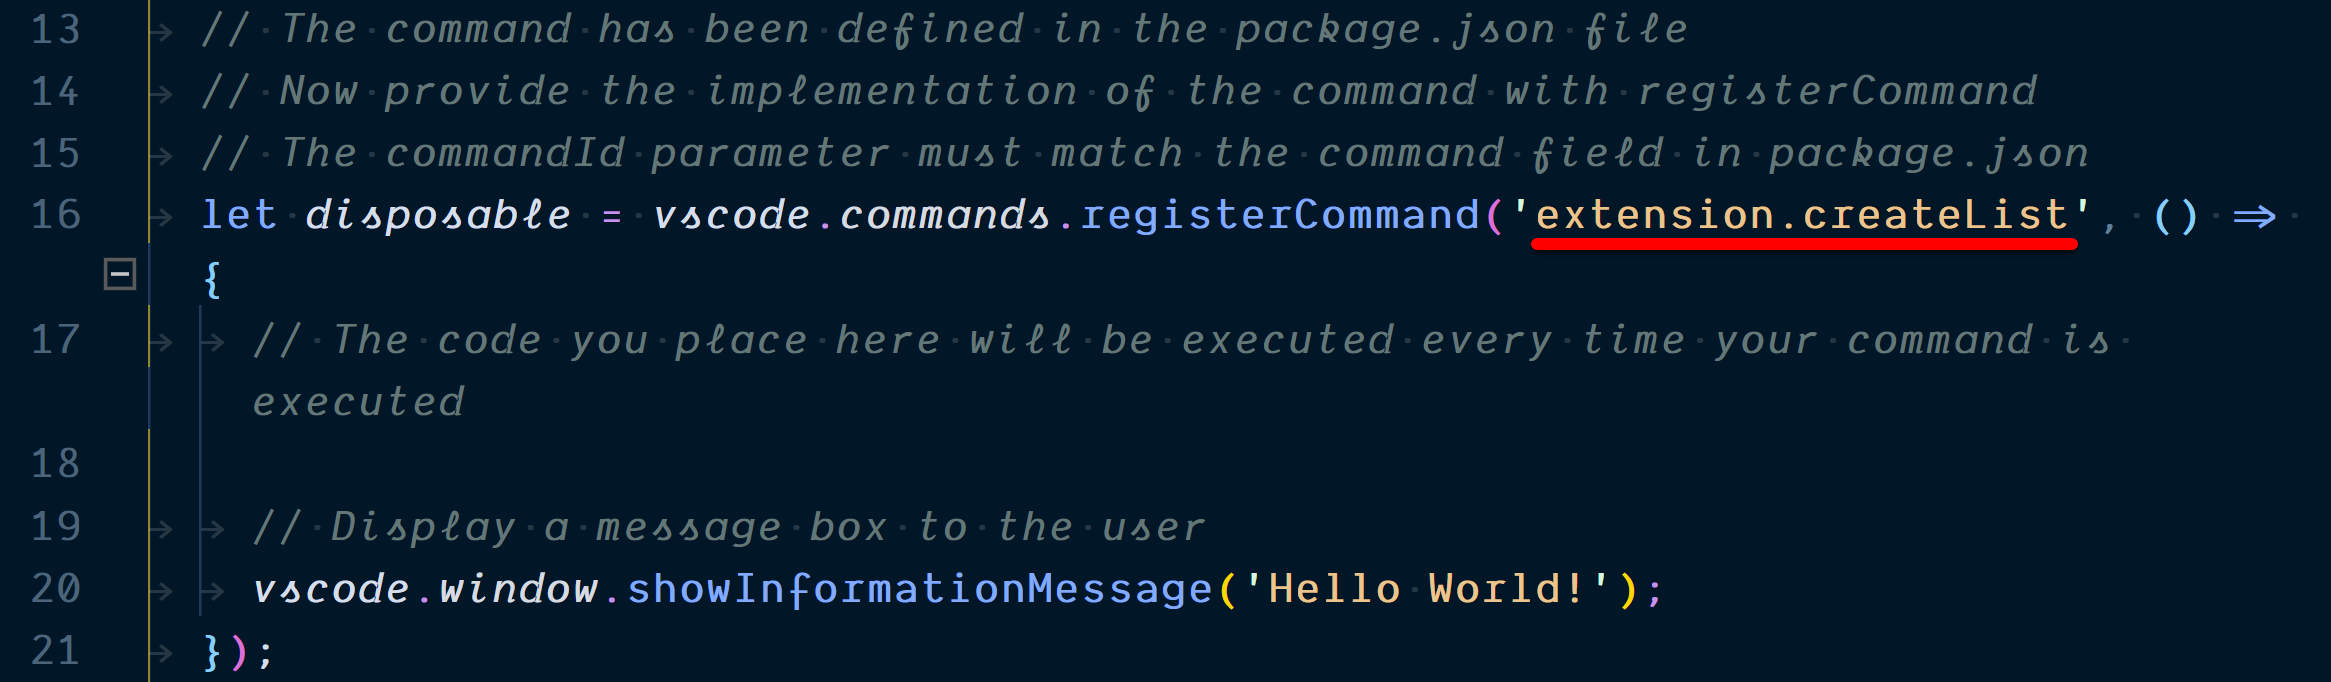 Changing the name of the registered command in code